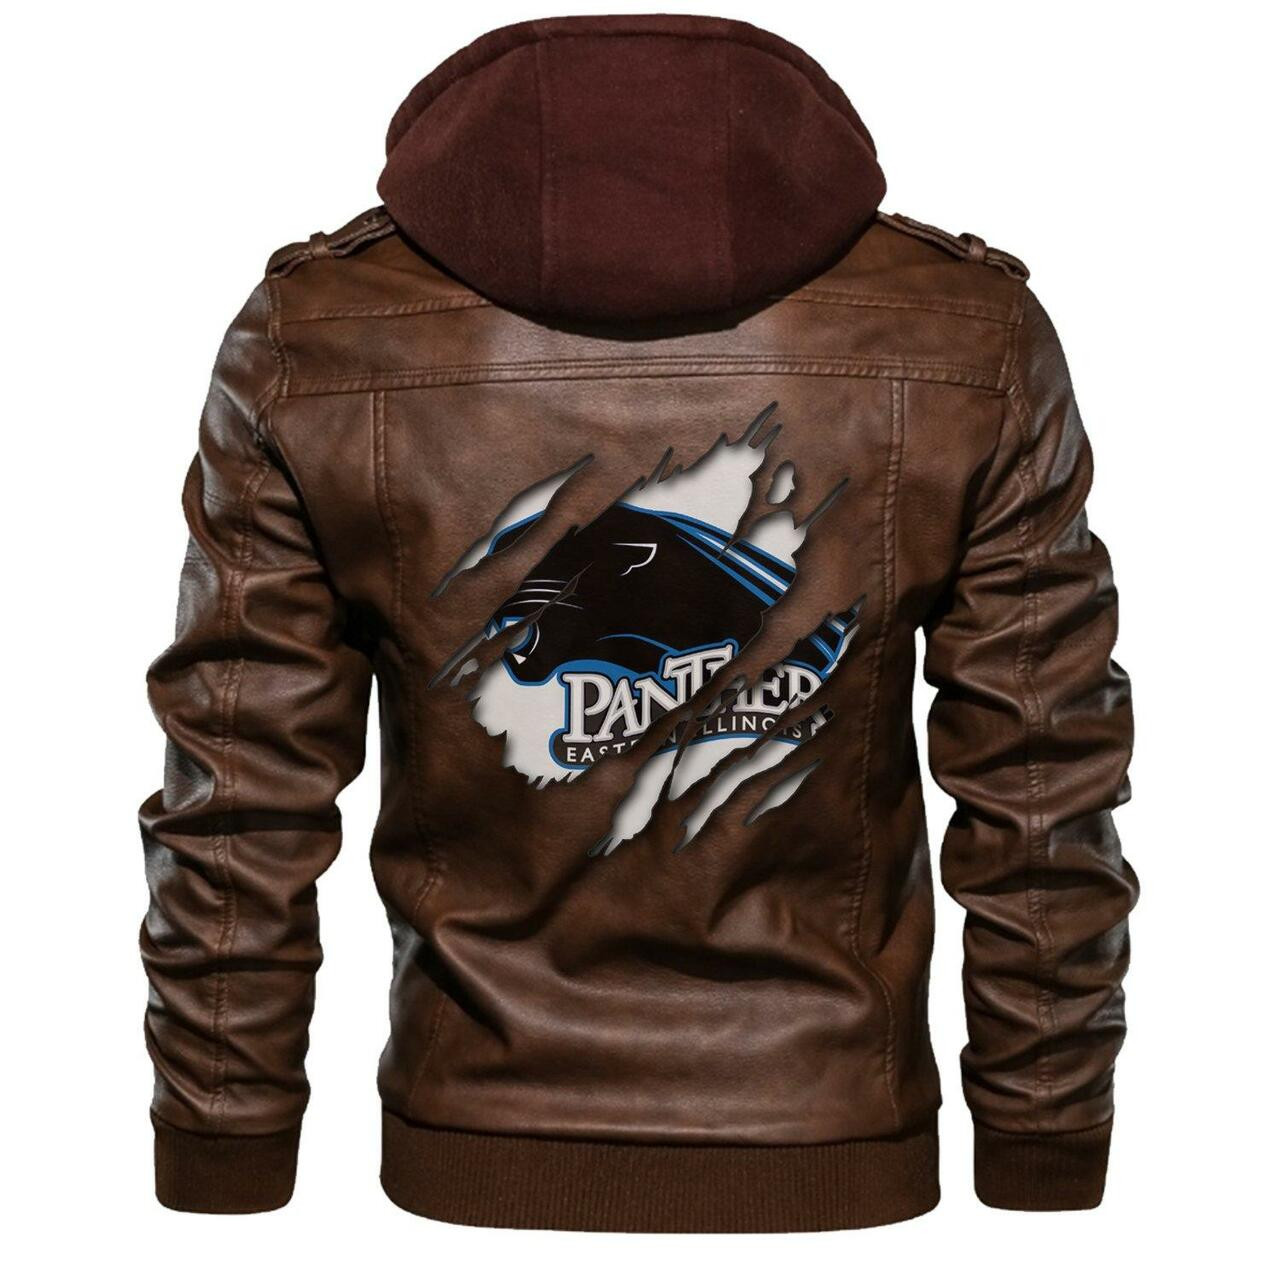 You can find a good leather jacket by access our website 50